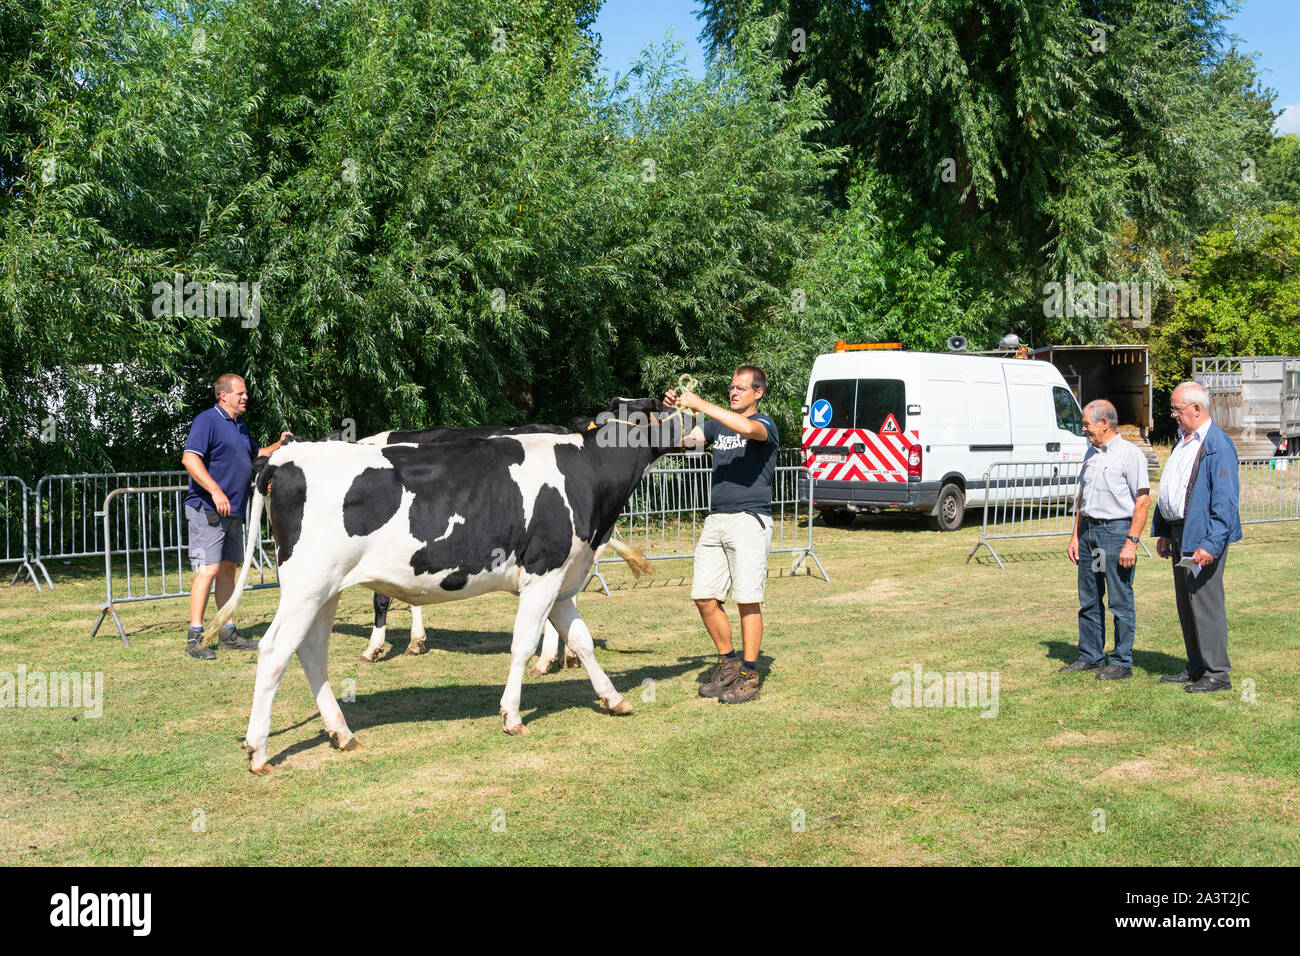 Kieldrecht, Belgium, 1 September 2019, Man has brought a large black and white cow on the cattle show Stock Photo